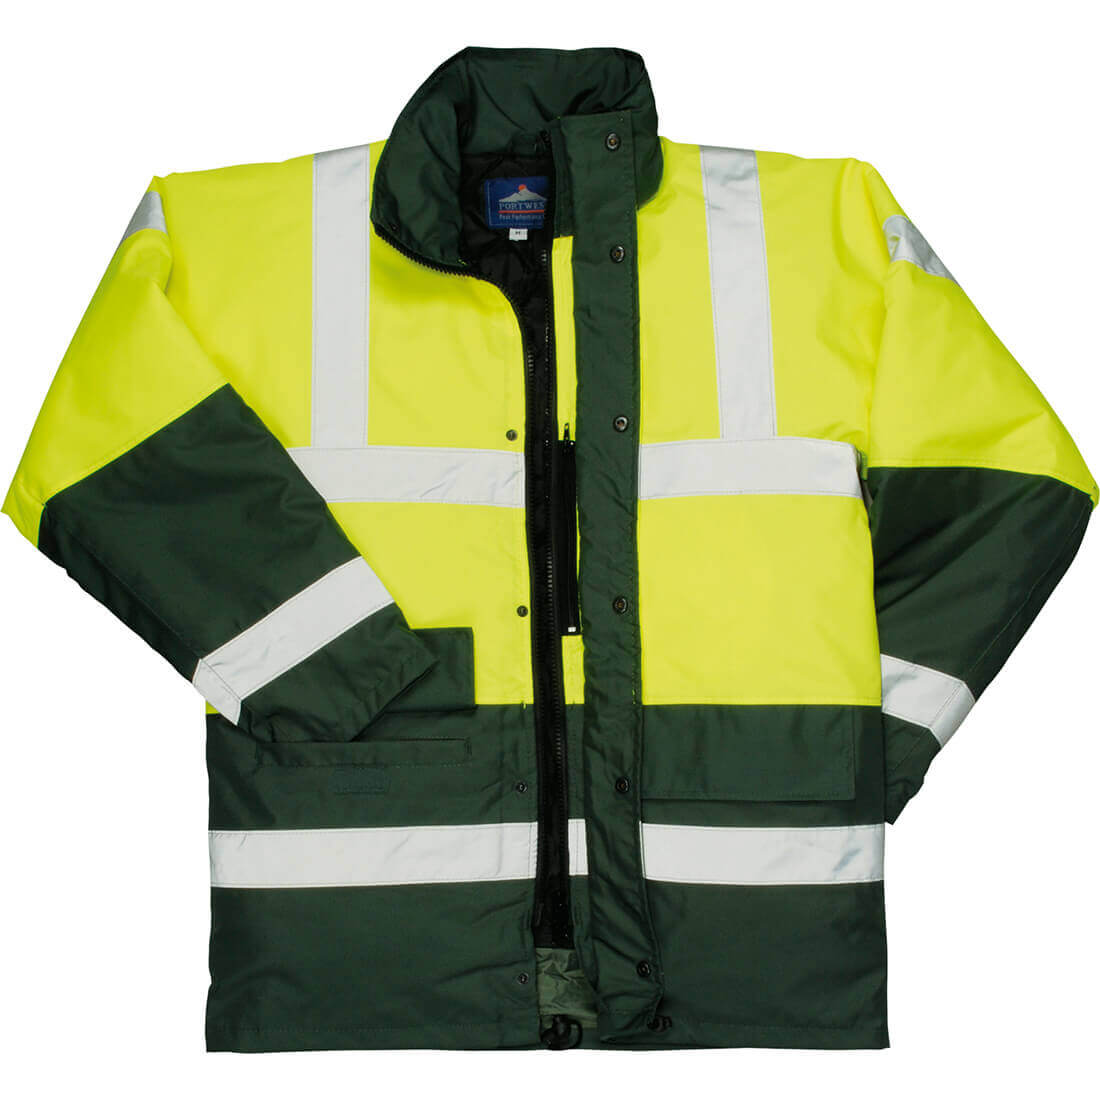 Image of Oxford Weave 300D Class 3 Hi Vis Contrast Traffic Jacket Yellow / Green M